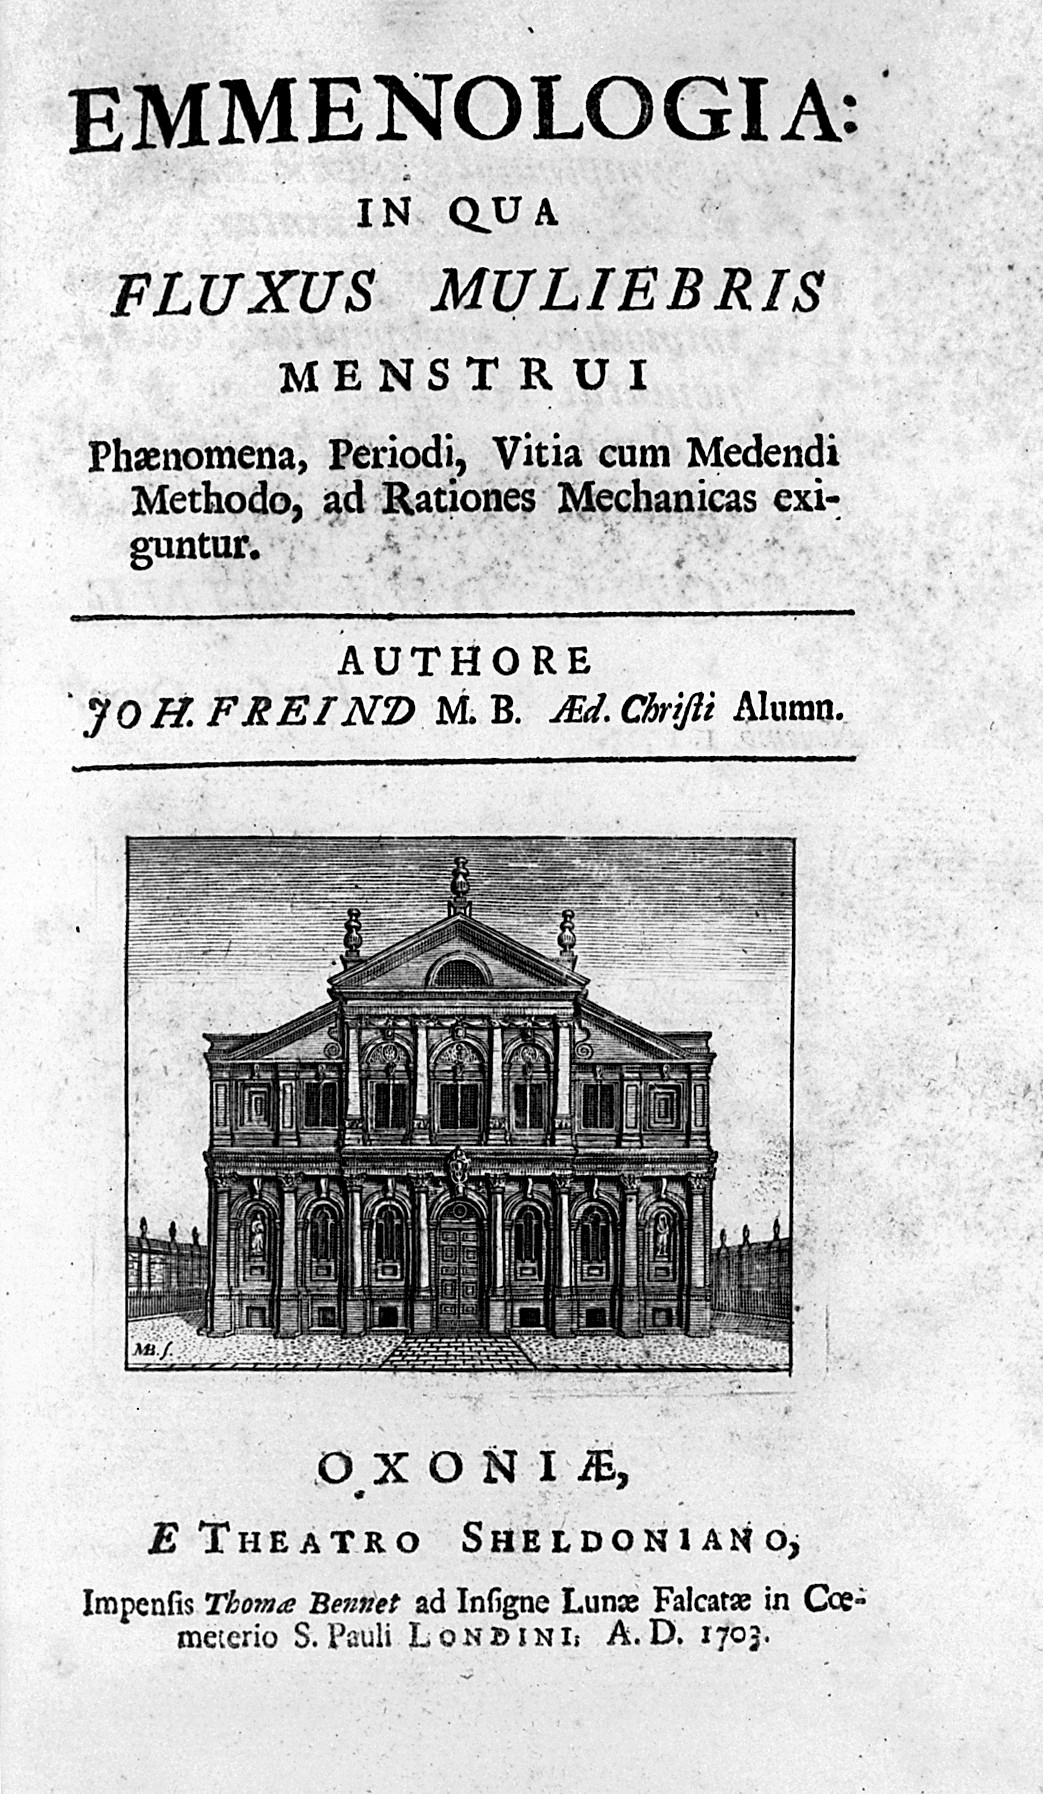 The title page of an early 18th century book written in latin, with an illustration of an Oxford college building.